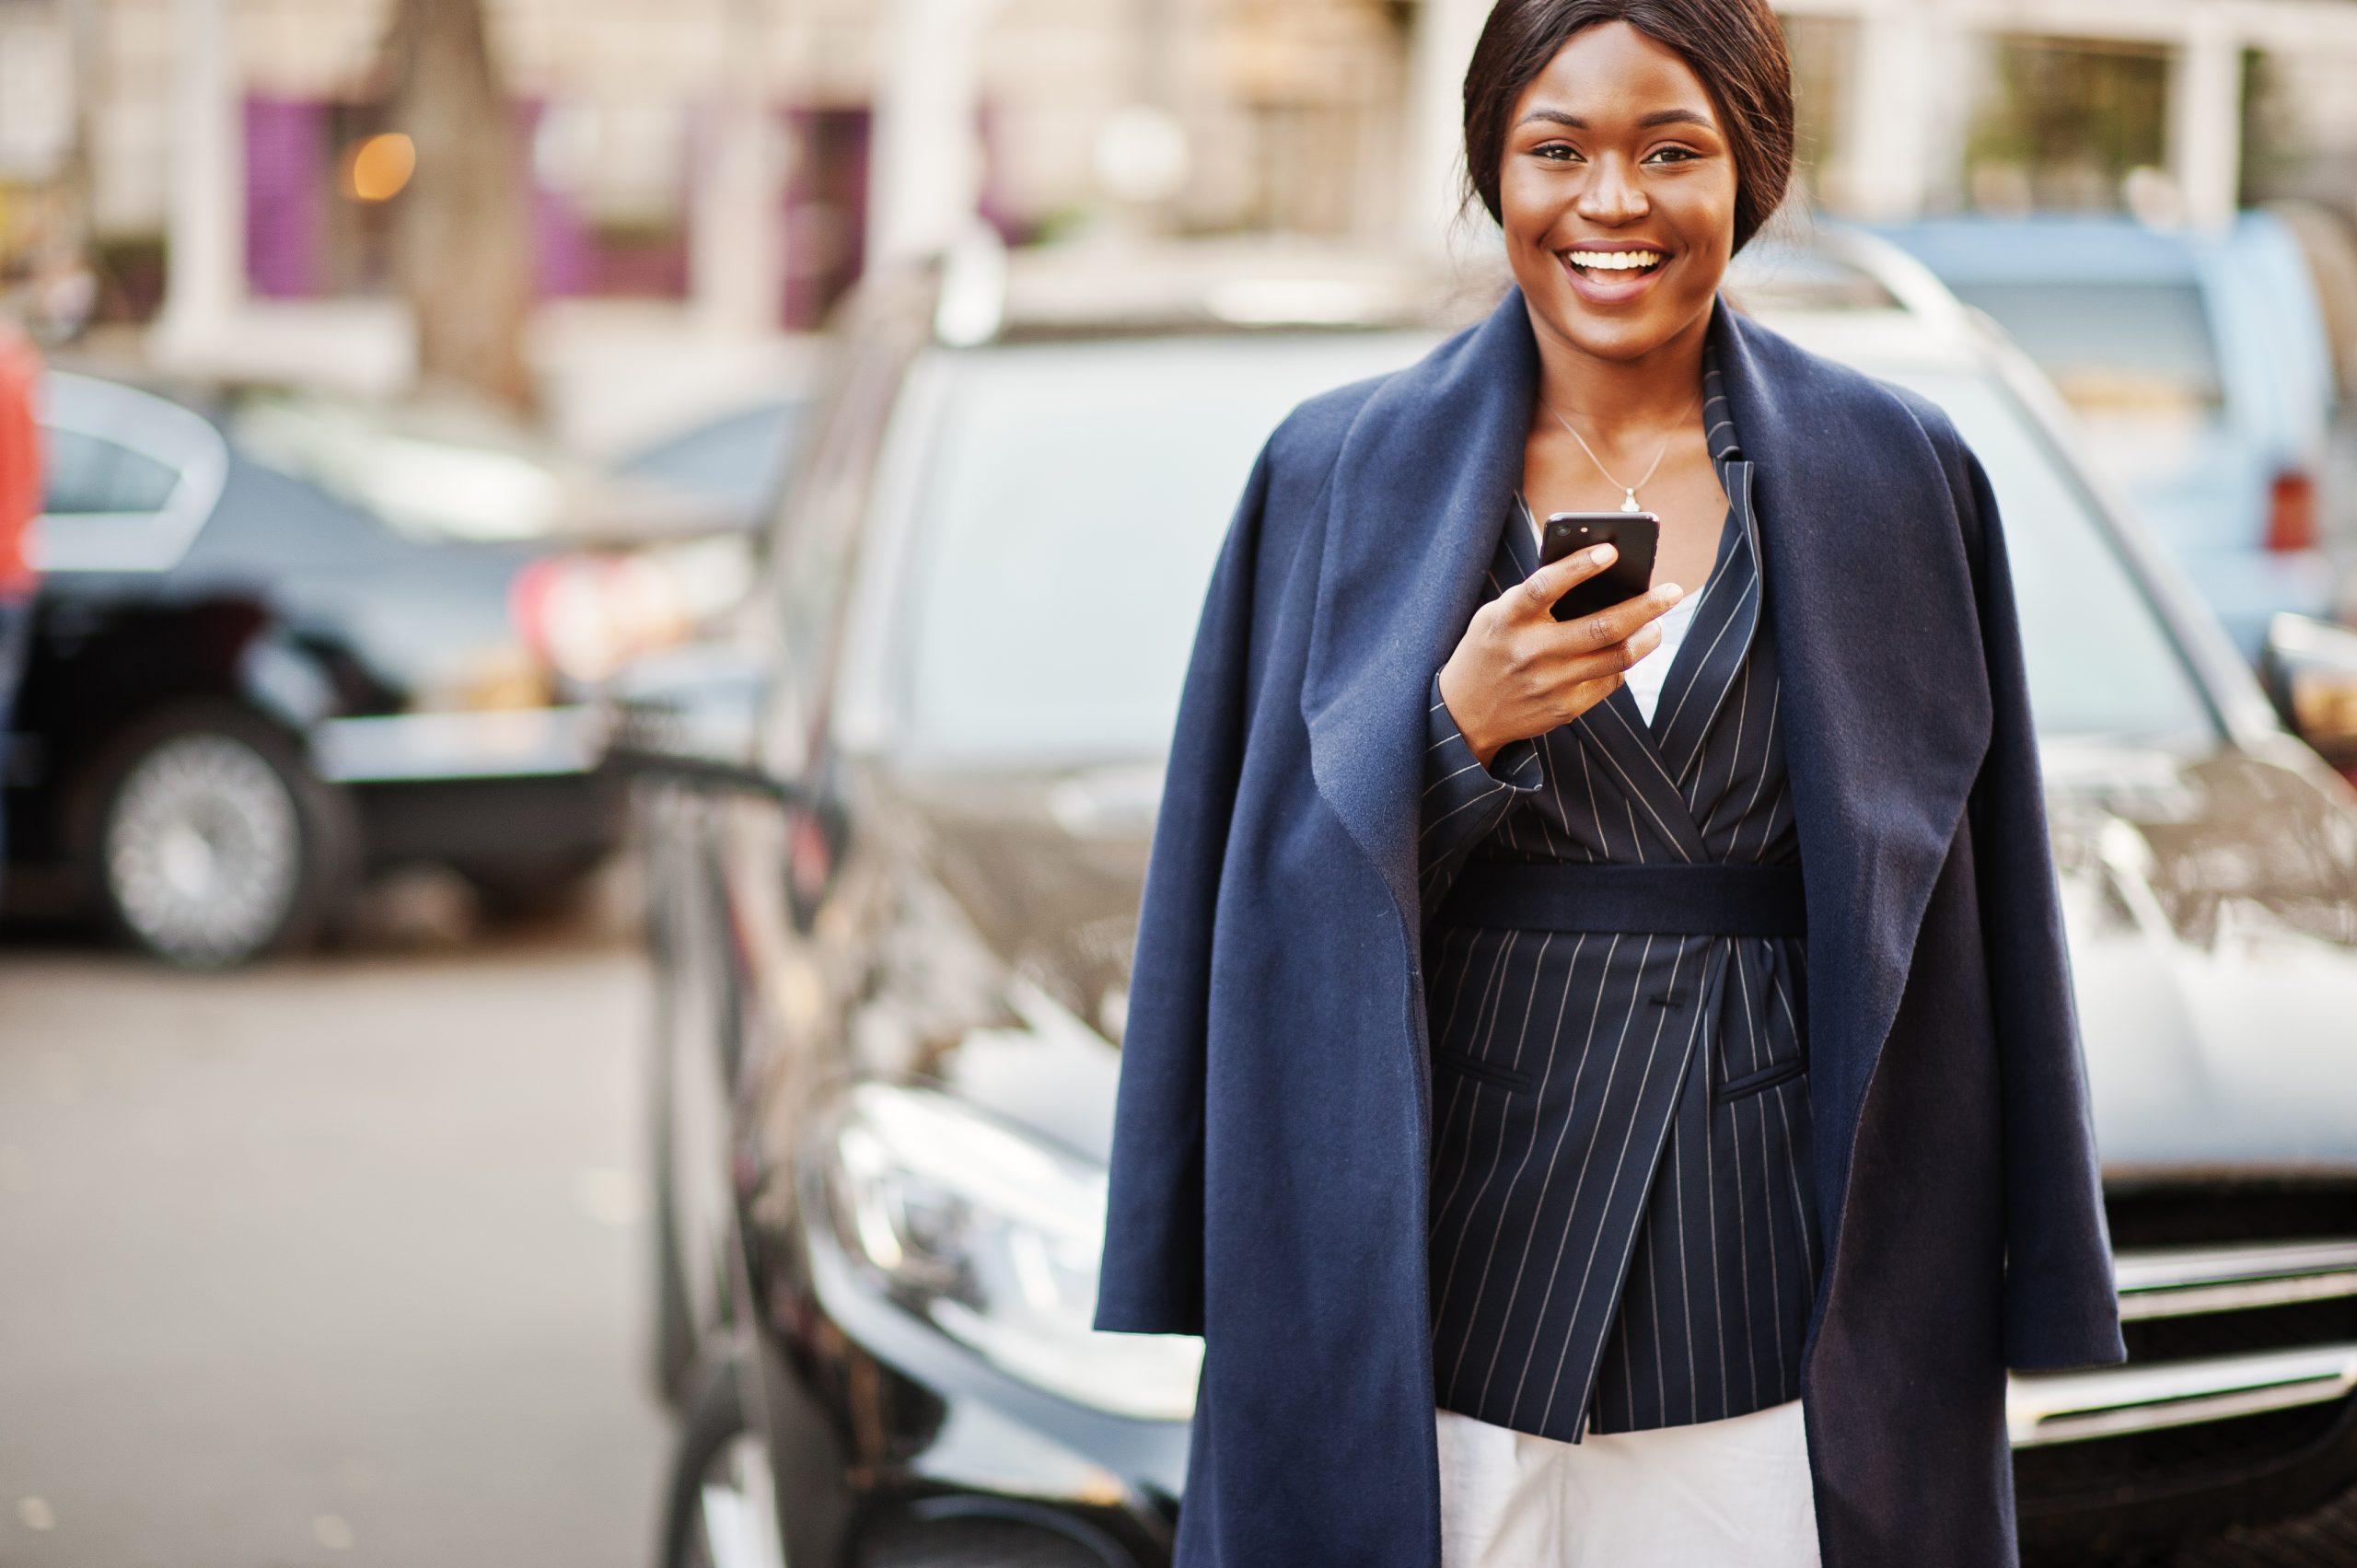 Entrepreneurial powerhouse takes control of her business expenses, confidently tracking her mileage using the intuitive MileageWise app on her smartphone.